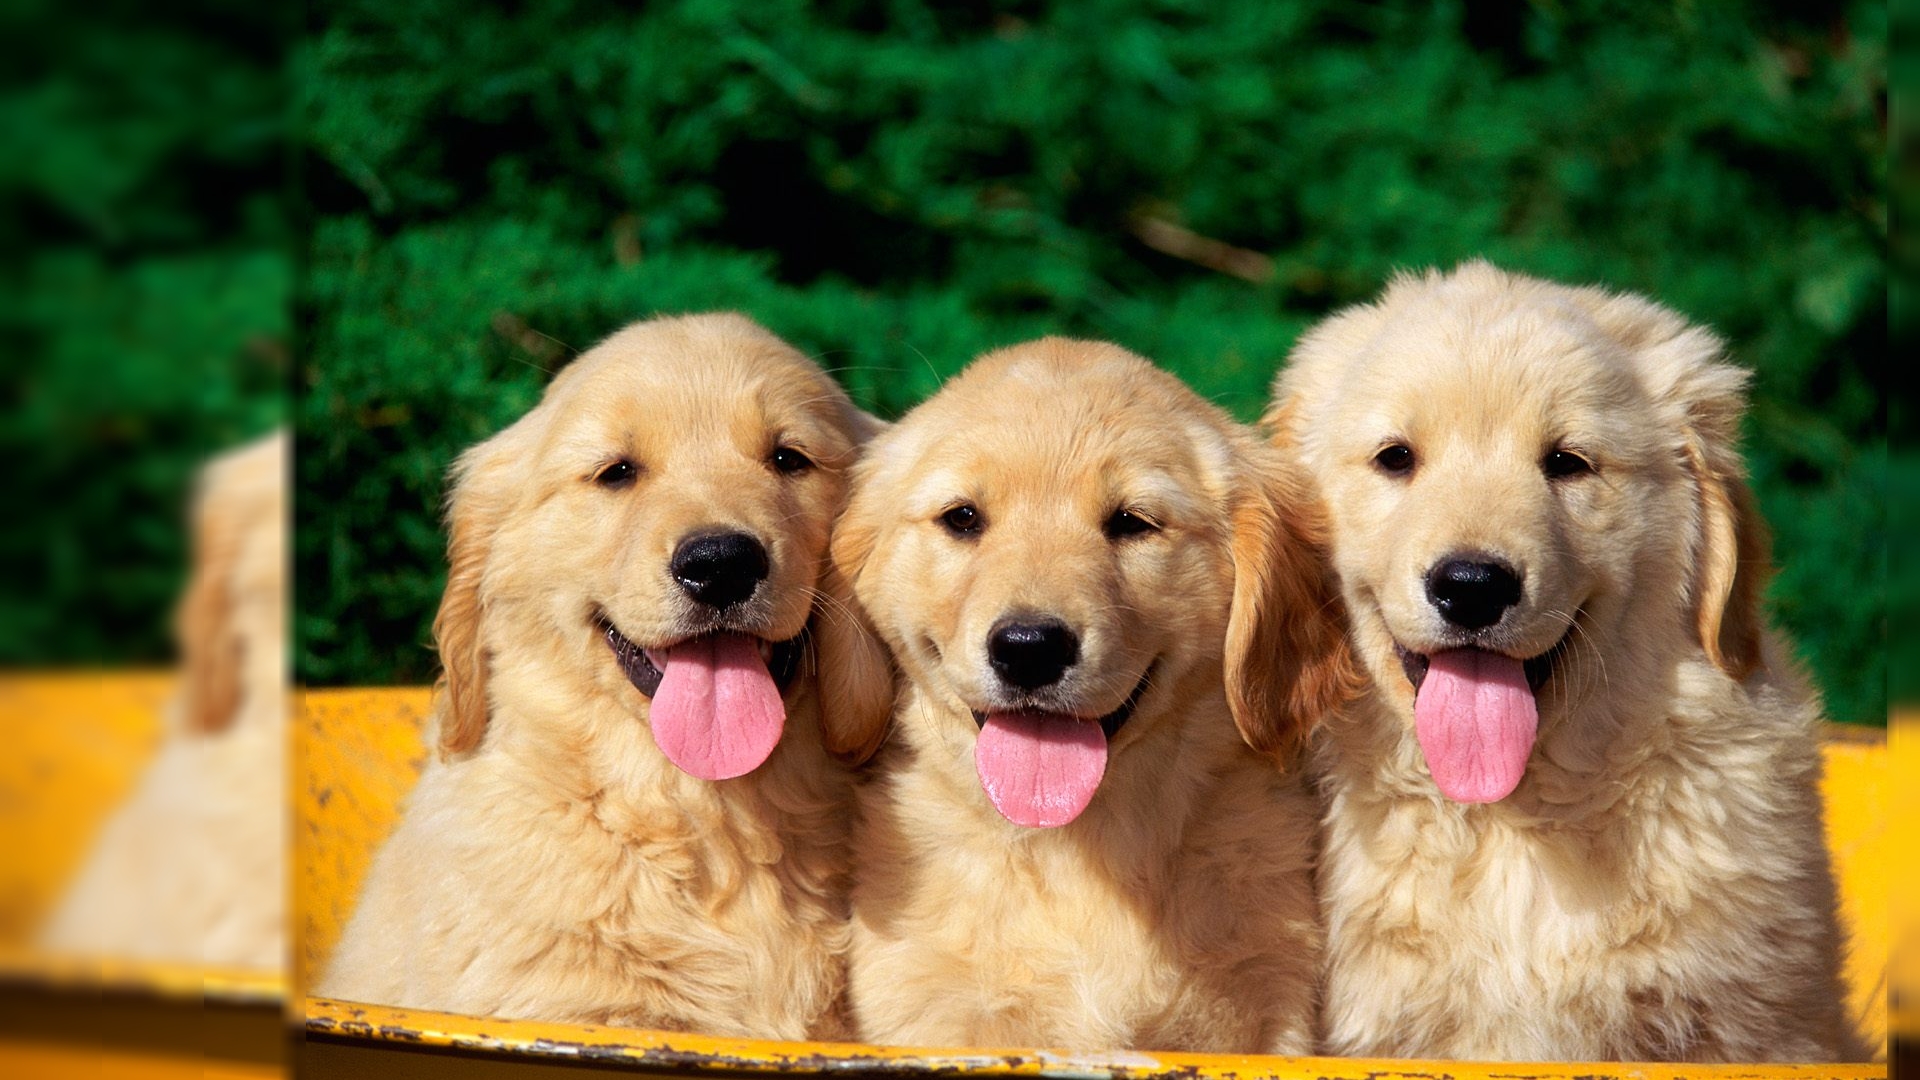 Dog Hd Wallpapers Are The Latest And Best Wallpapers - 3 Golden Retriever  Puppies - 1920x1080 Wallpaper 